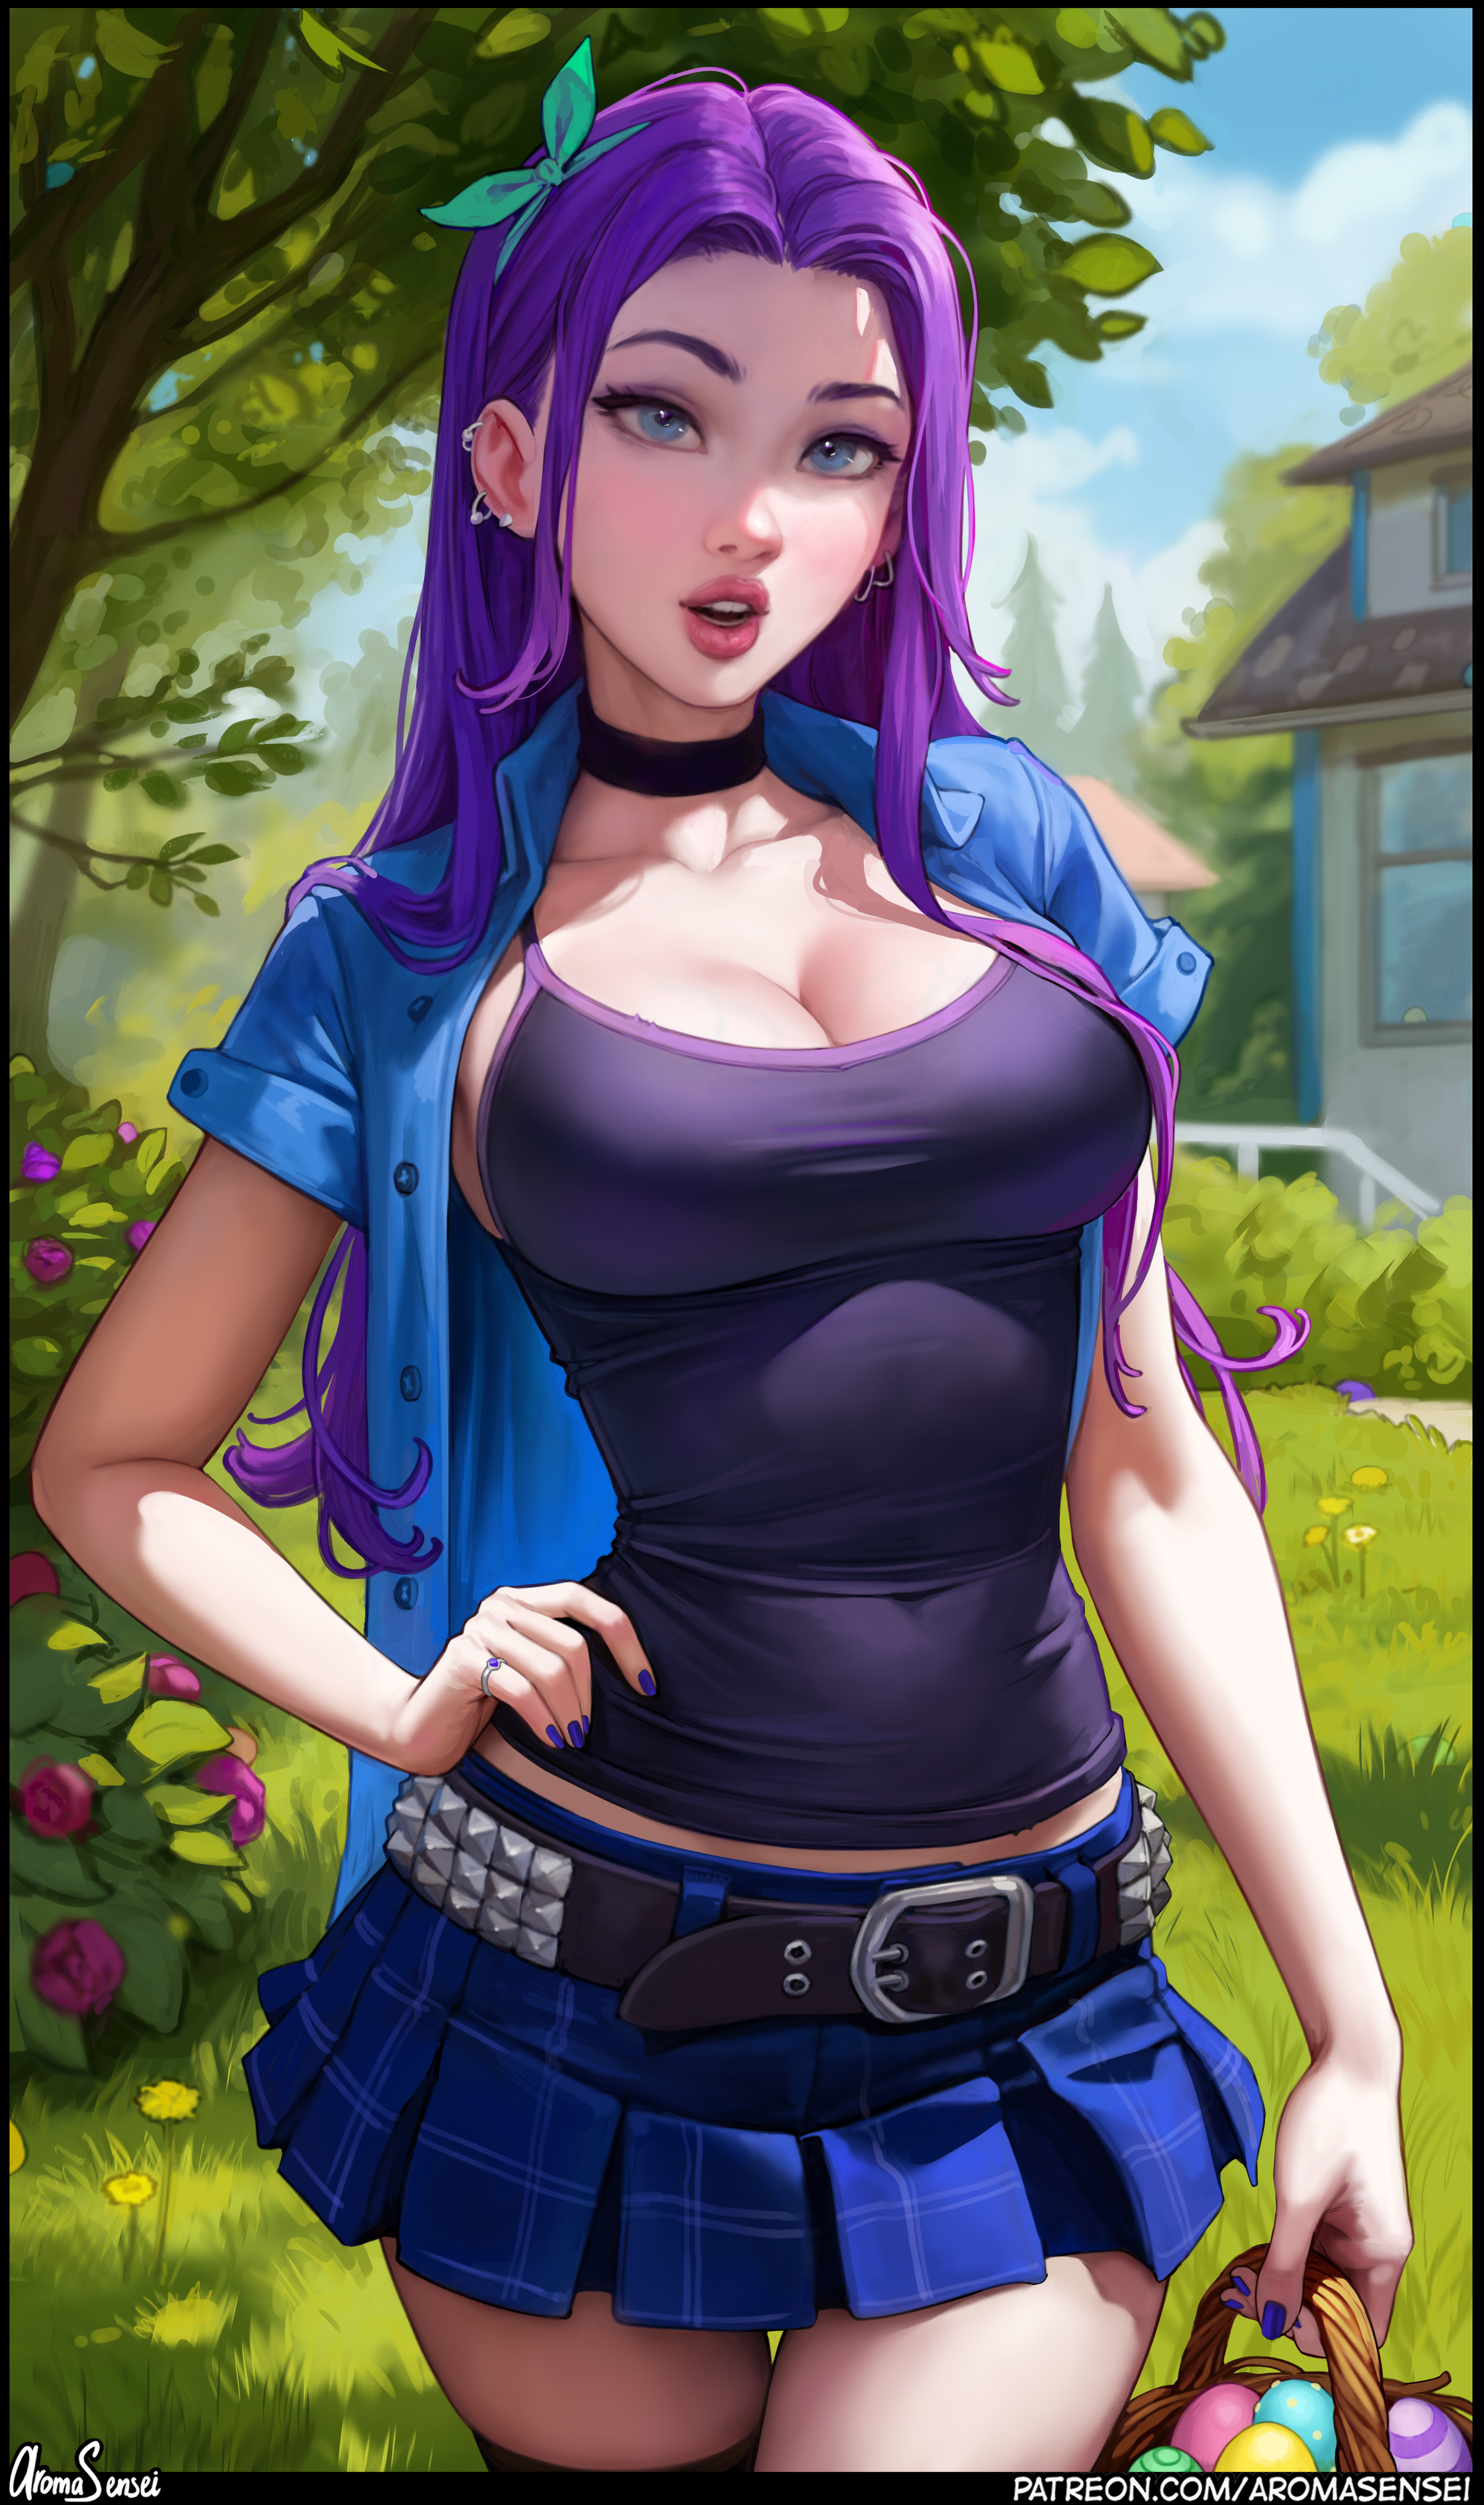 Abigail Stardew Valley Stardew Valley Video Games Video Game Girls Video Game Characters Artwork Dra 2962x5000